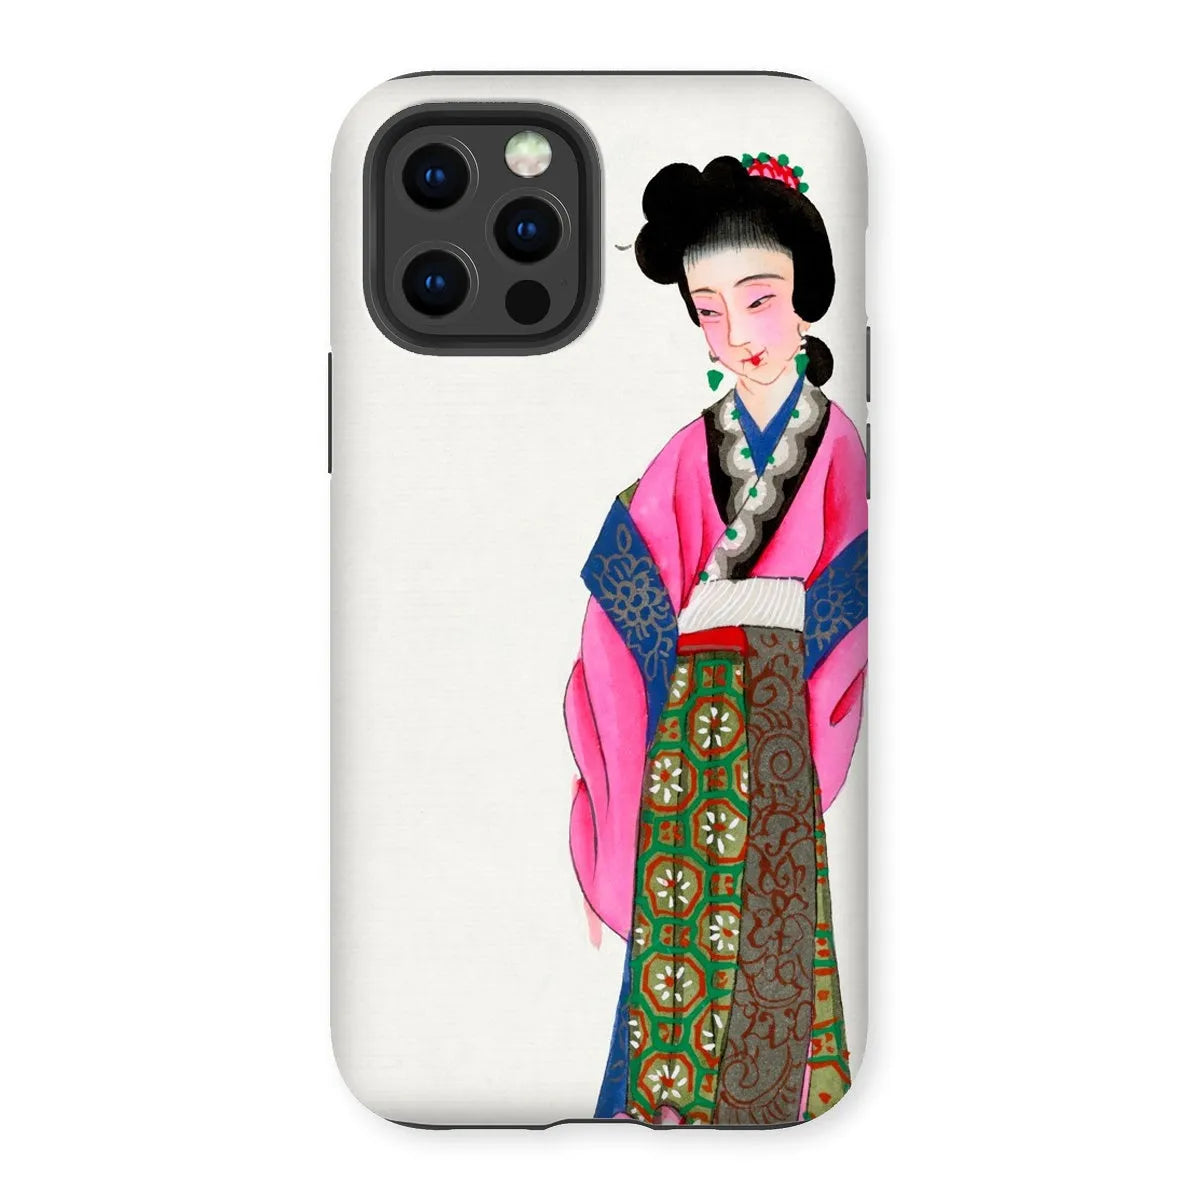 Noblewoman - Chinese Aesthetic Manchu Art Phone Case - Iphone 12 Pro / Matte - Mobile Phone Cases - Aesthetic Art